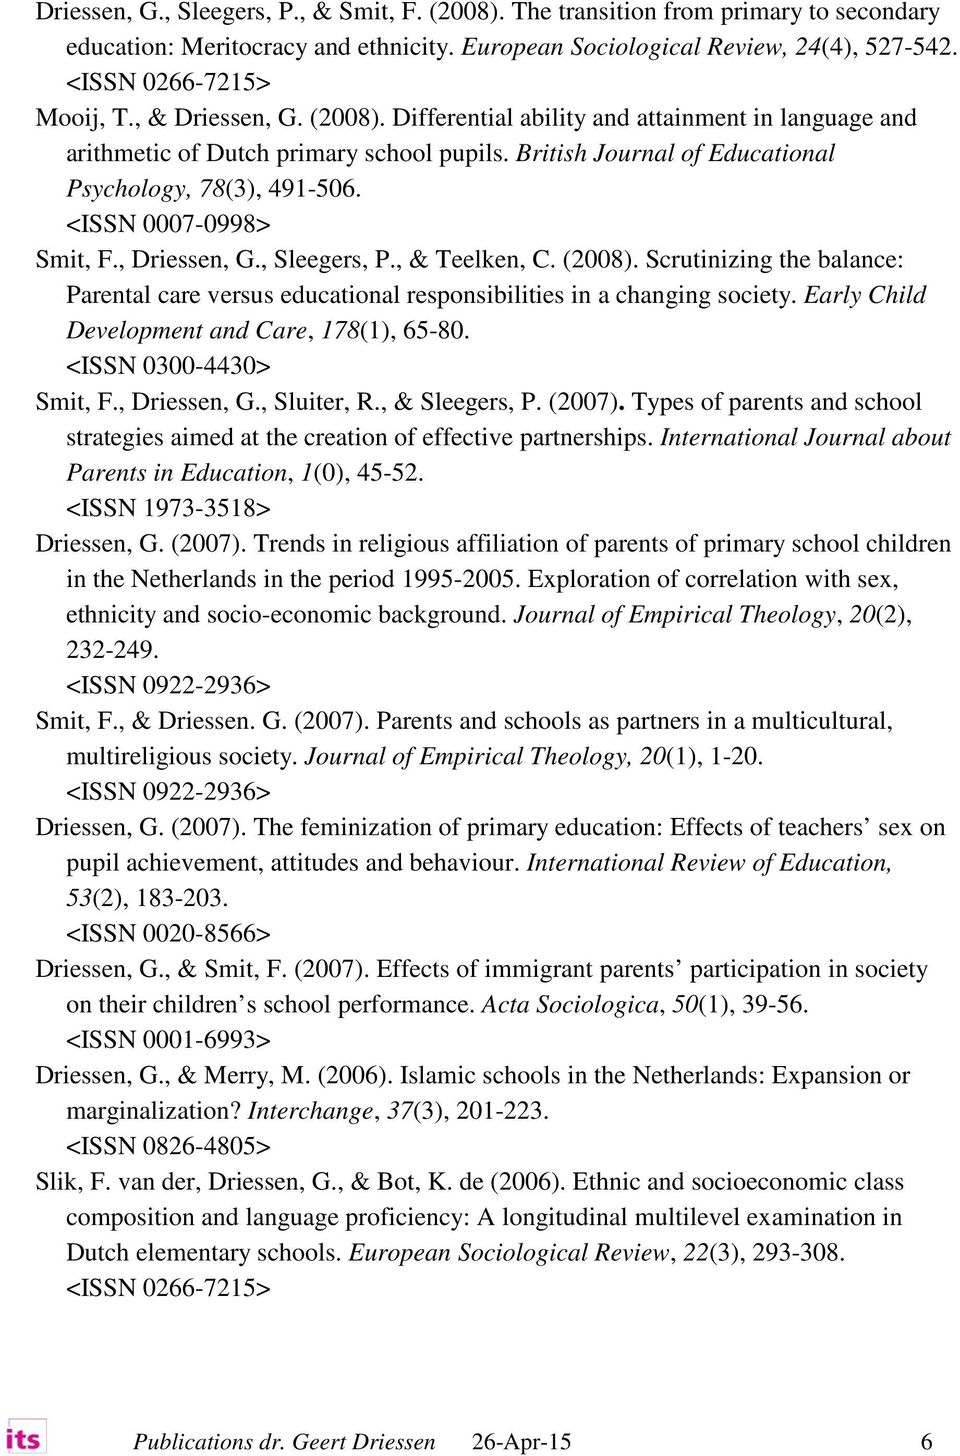 <ISSN 0007-0998> Smit, F., Driessen, G., Sleegers, P., & Teelken, C. (2008). Scrutinizing the balance: Parental care versus educational responsibilities in a changing society.